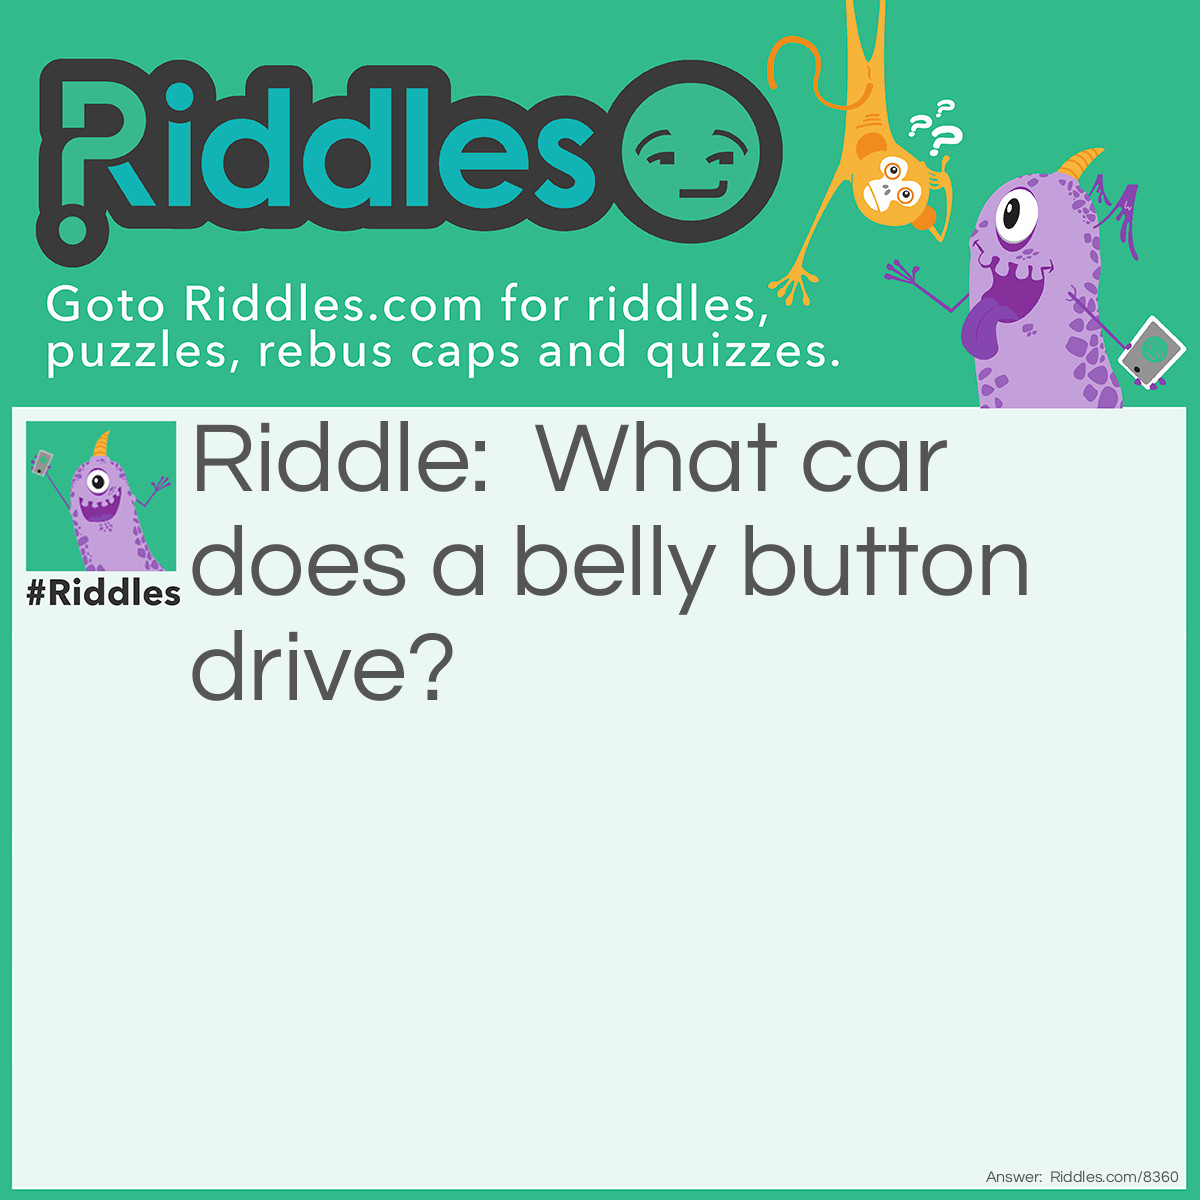 Riddle: What car does a belly button drive? Answer: An Audi (Outtie) ((Like a belly button))!!!!!!!! ;)